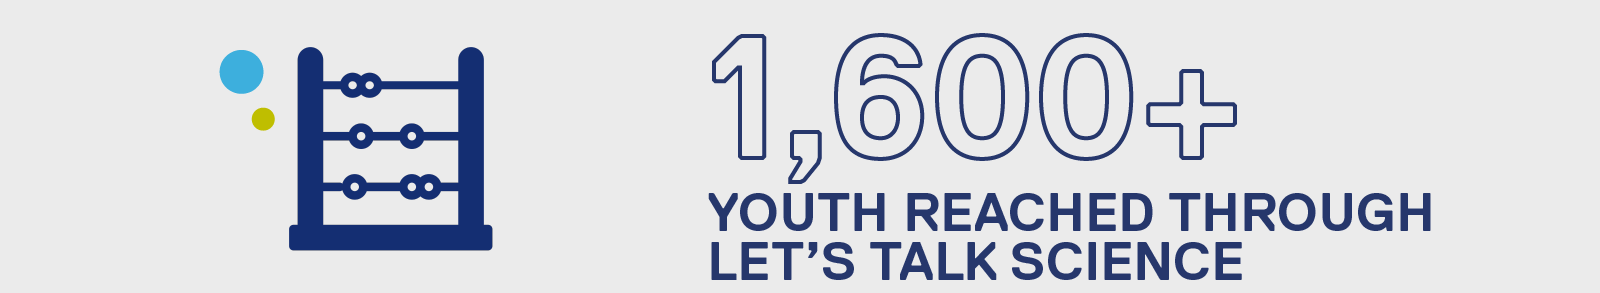 1600 plus youth reached through lets talk science